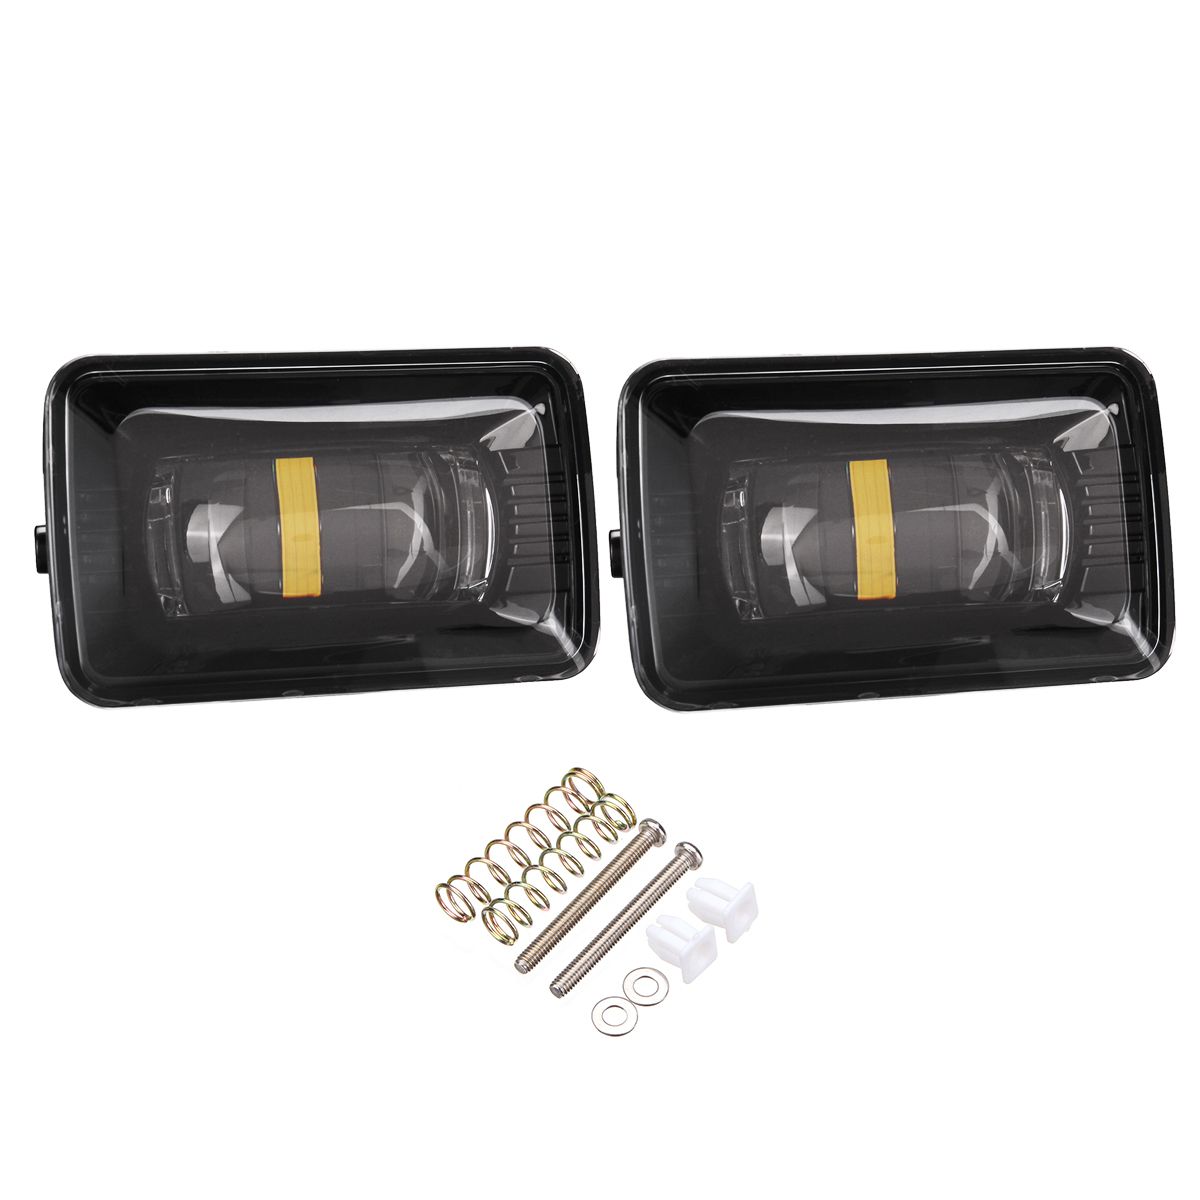 Pair-Front-Bumper-LED-Fog-Lights-Lamps-for-Ford-F-150-2015-2017-1267700